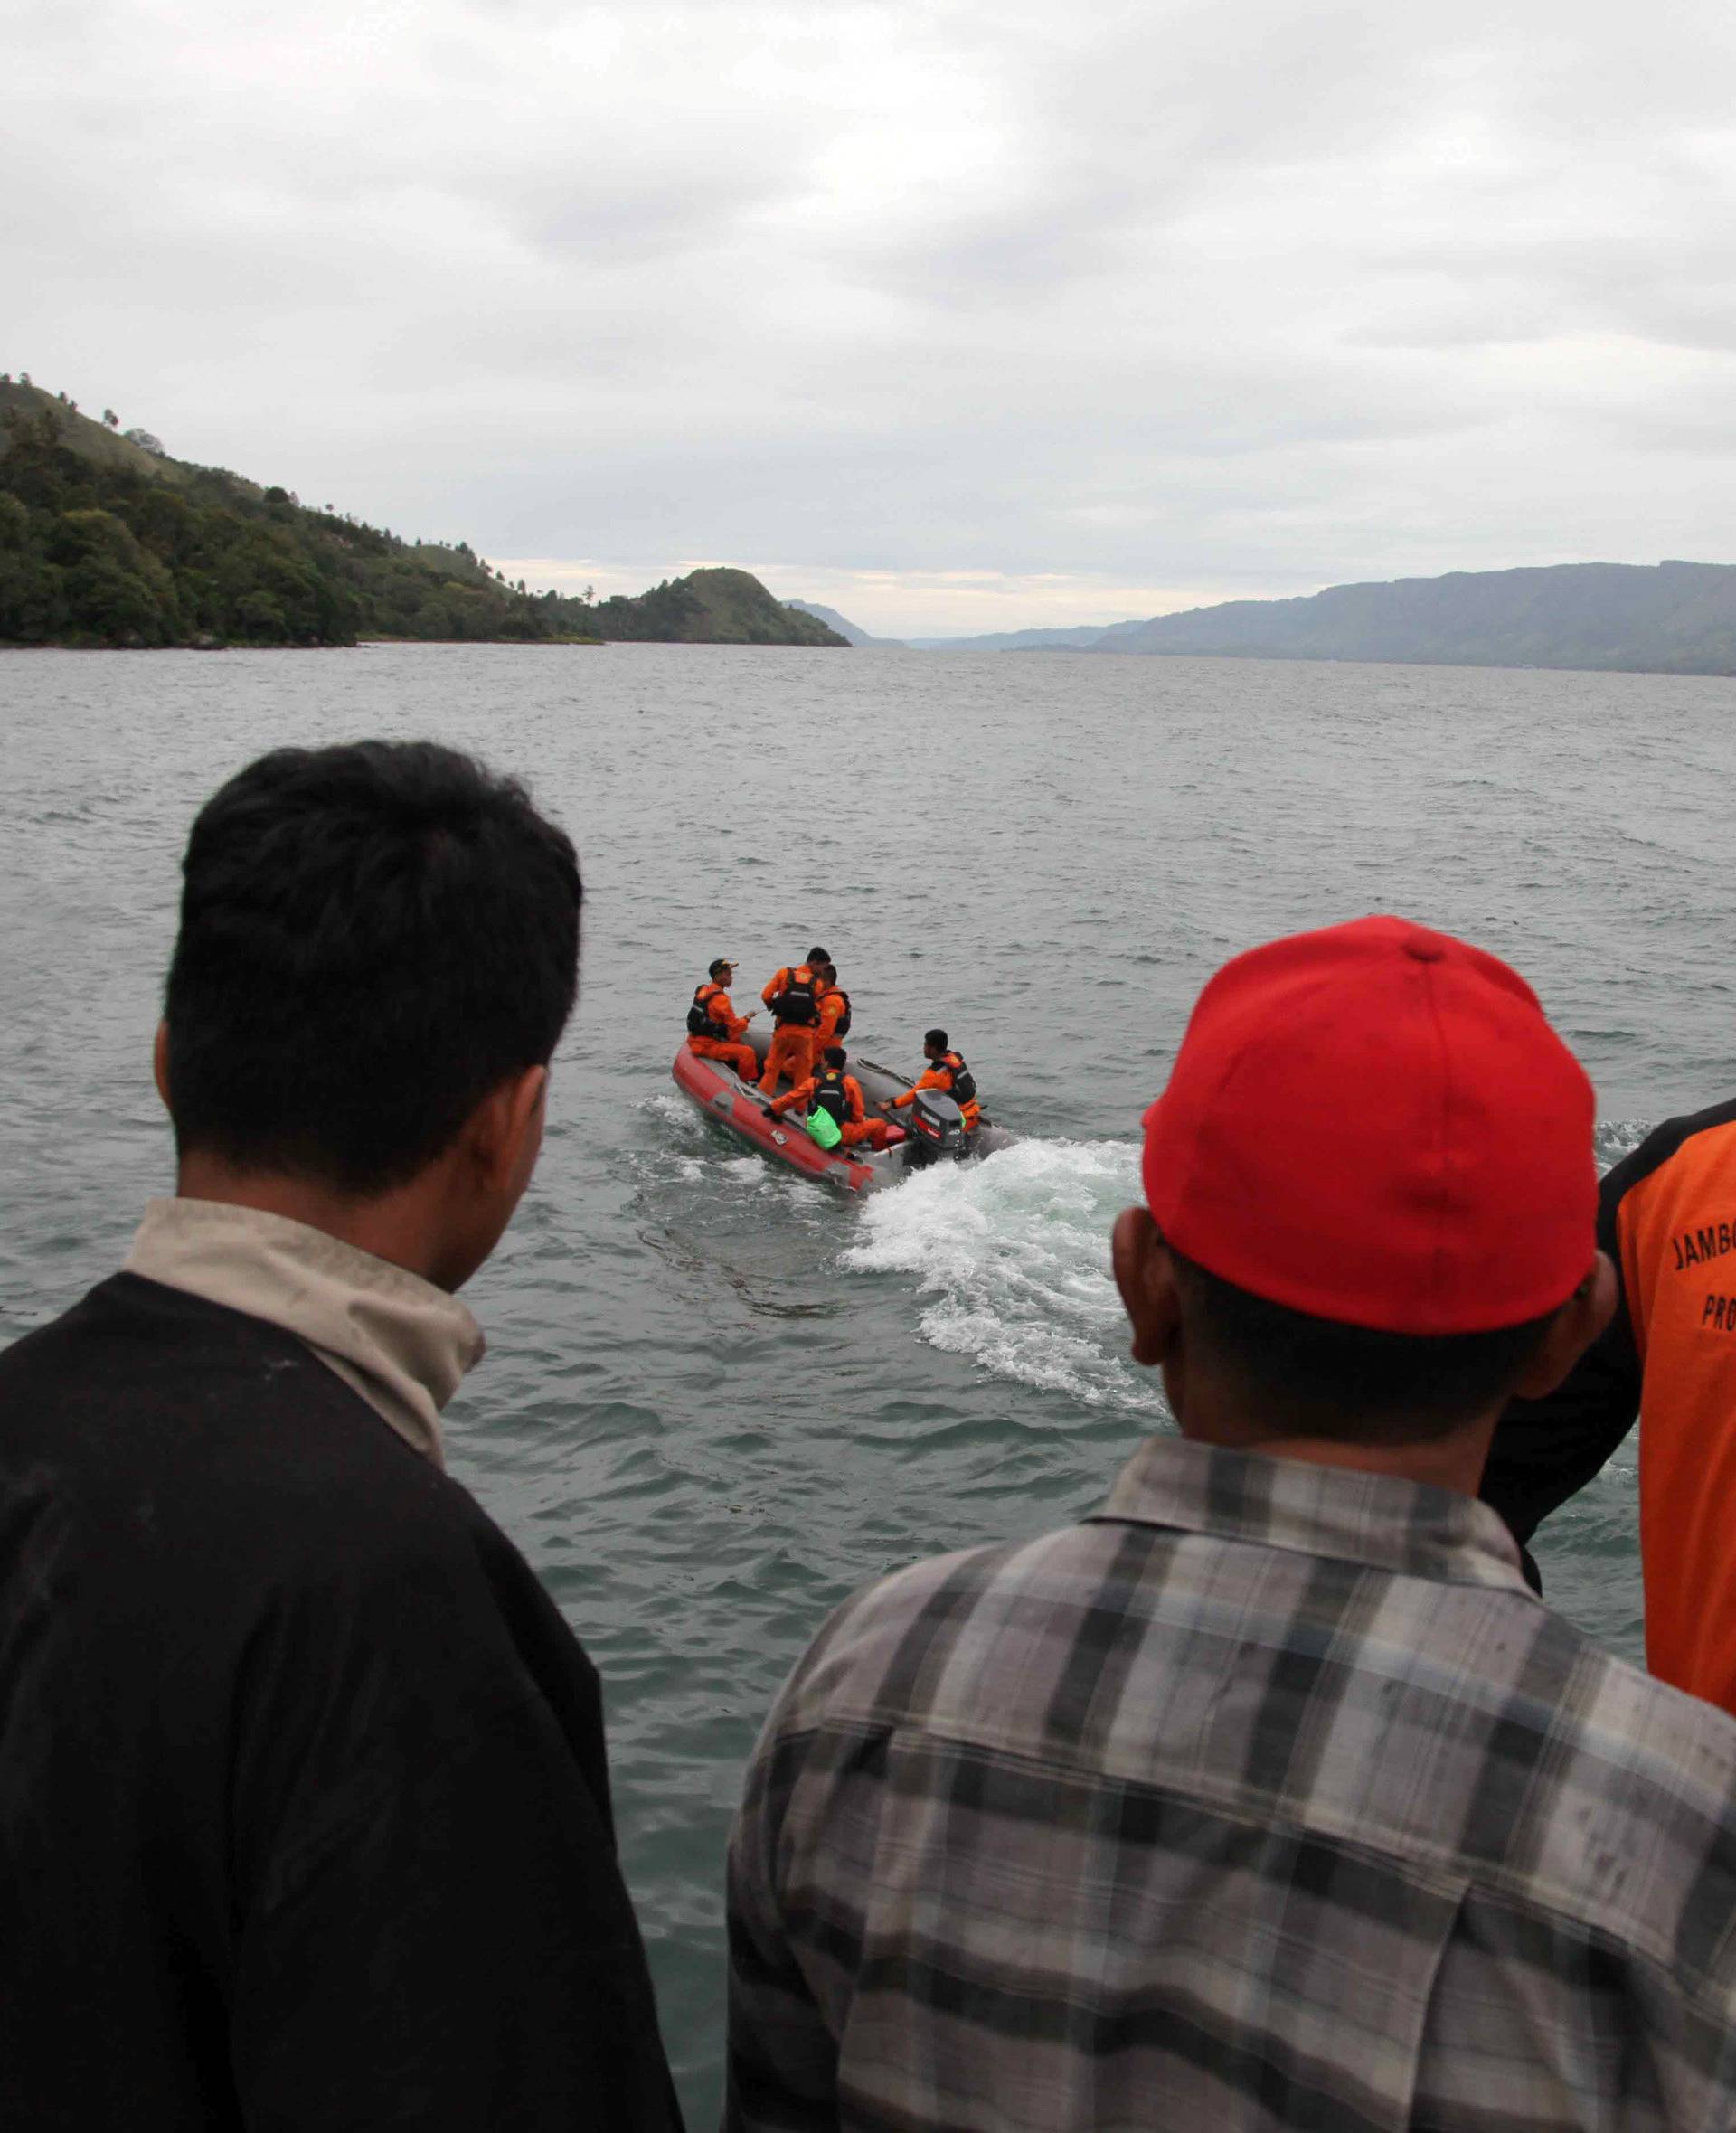 A search and rescue team heads out looking for missing passengers who were on a ferry that sank in Lake Toba